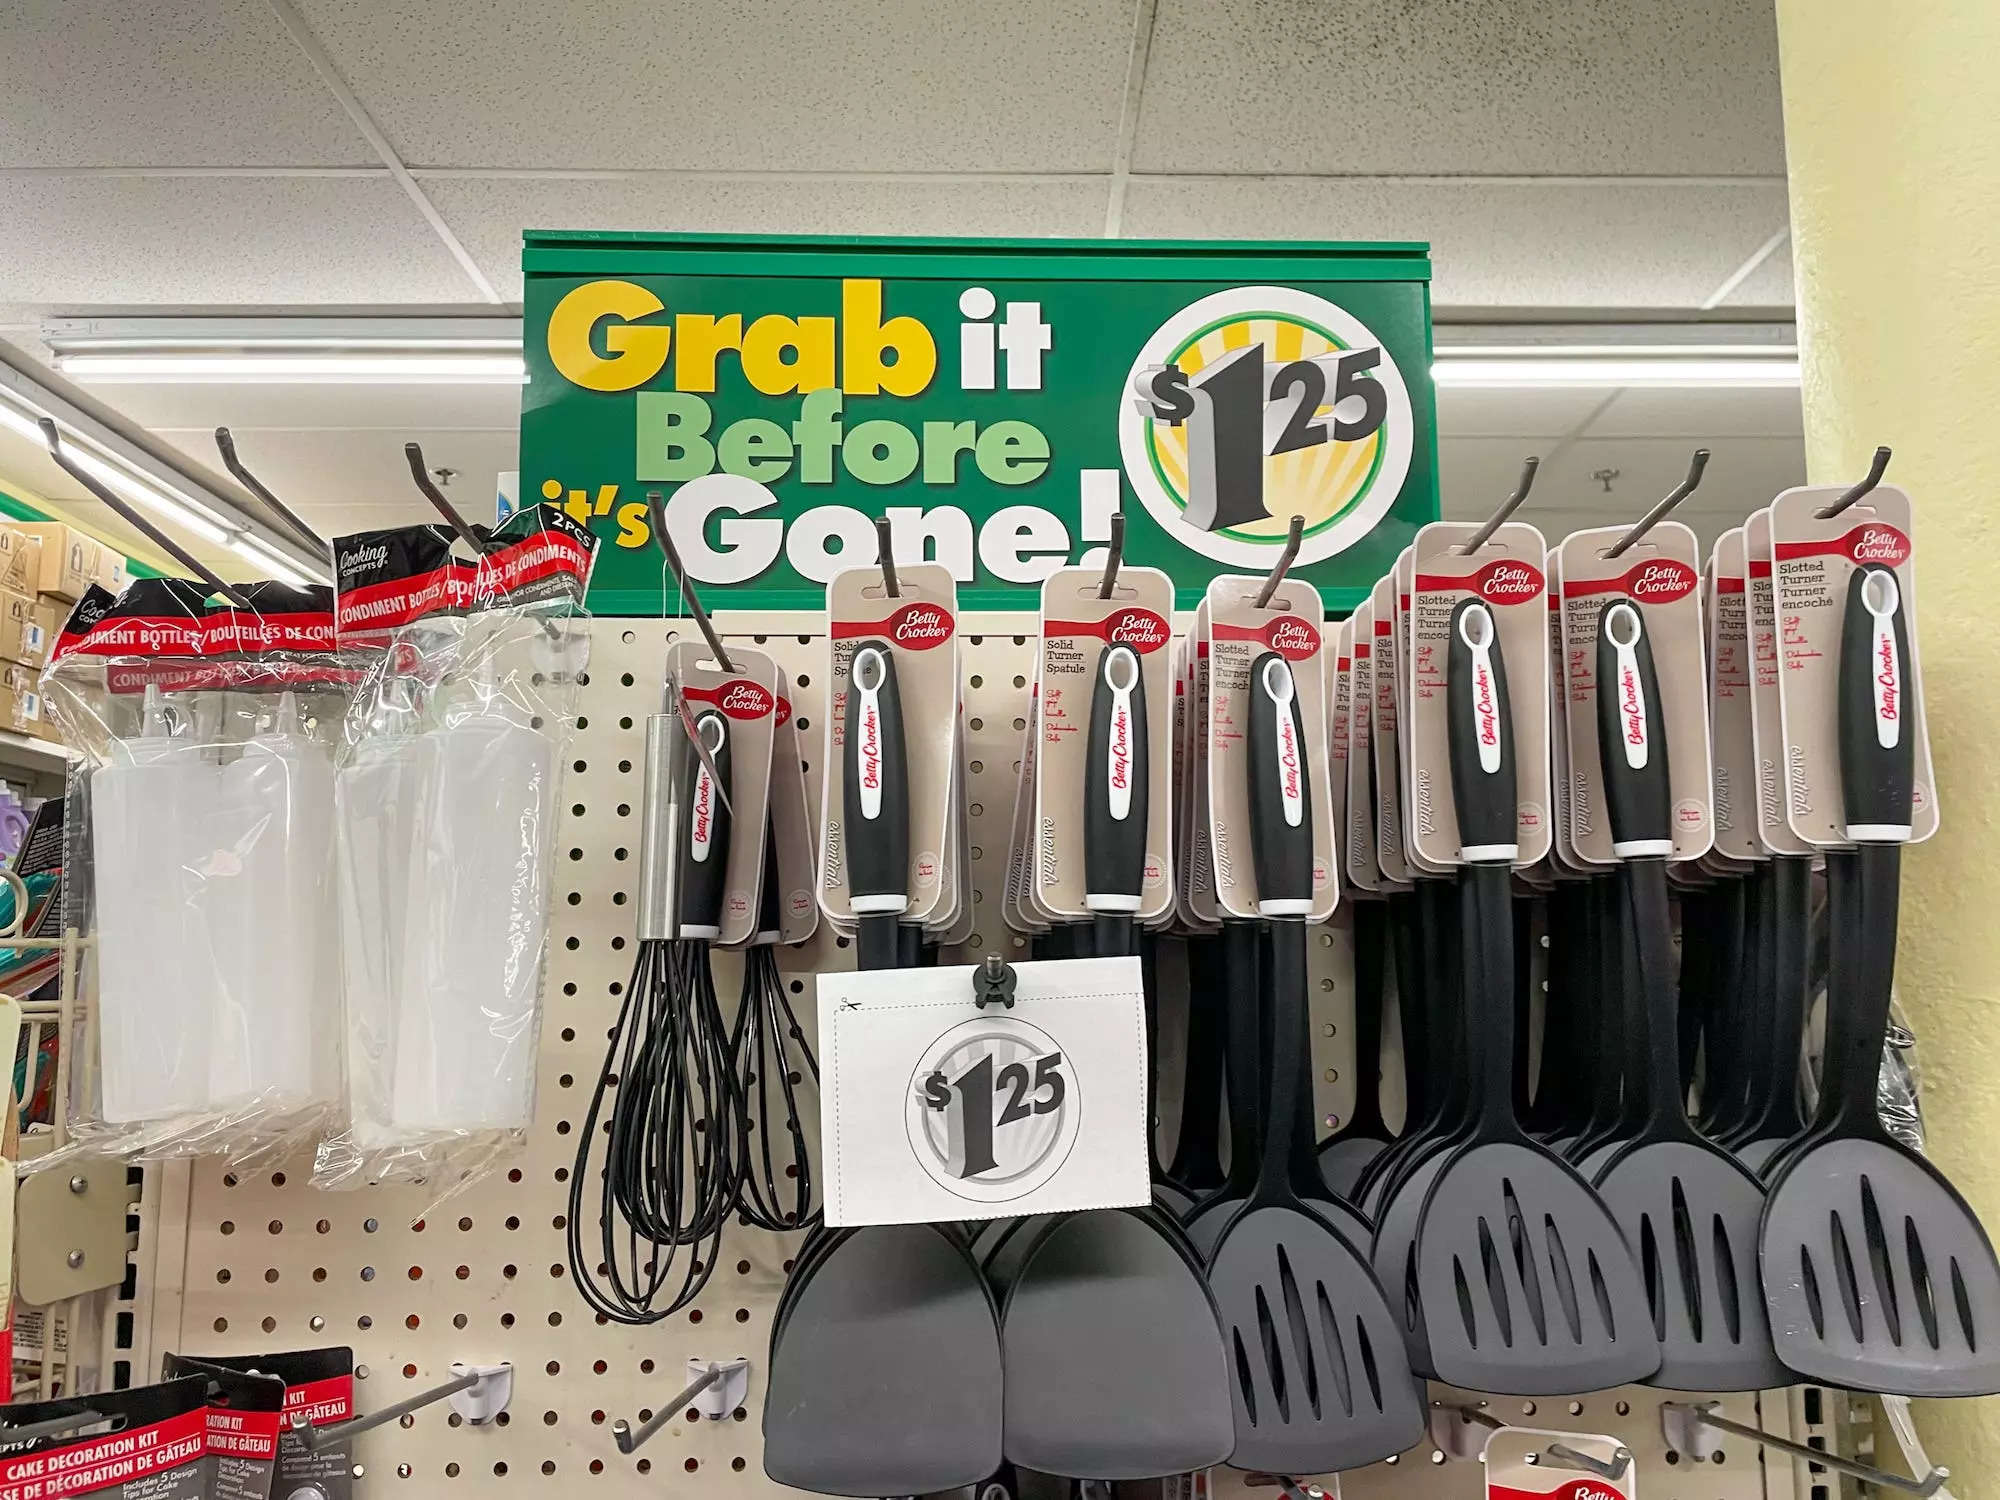 Which Dollar Store Chain Actually Sells Everything for $1?